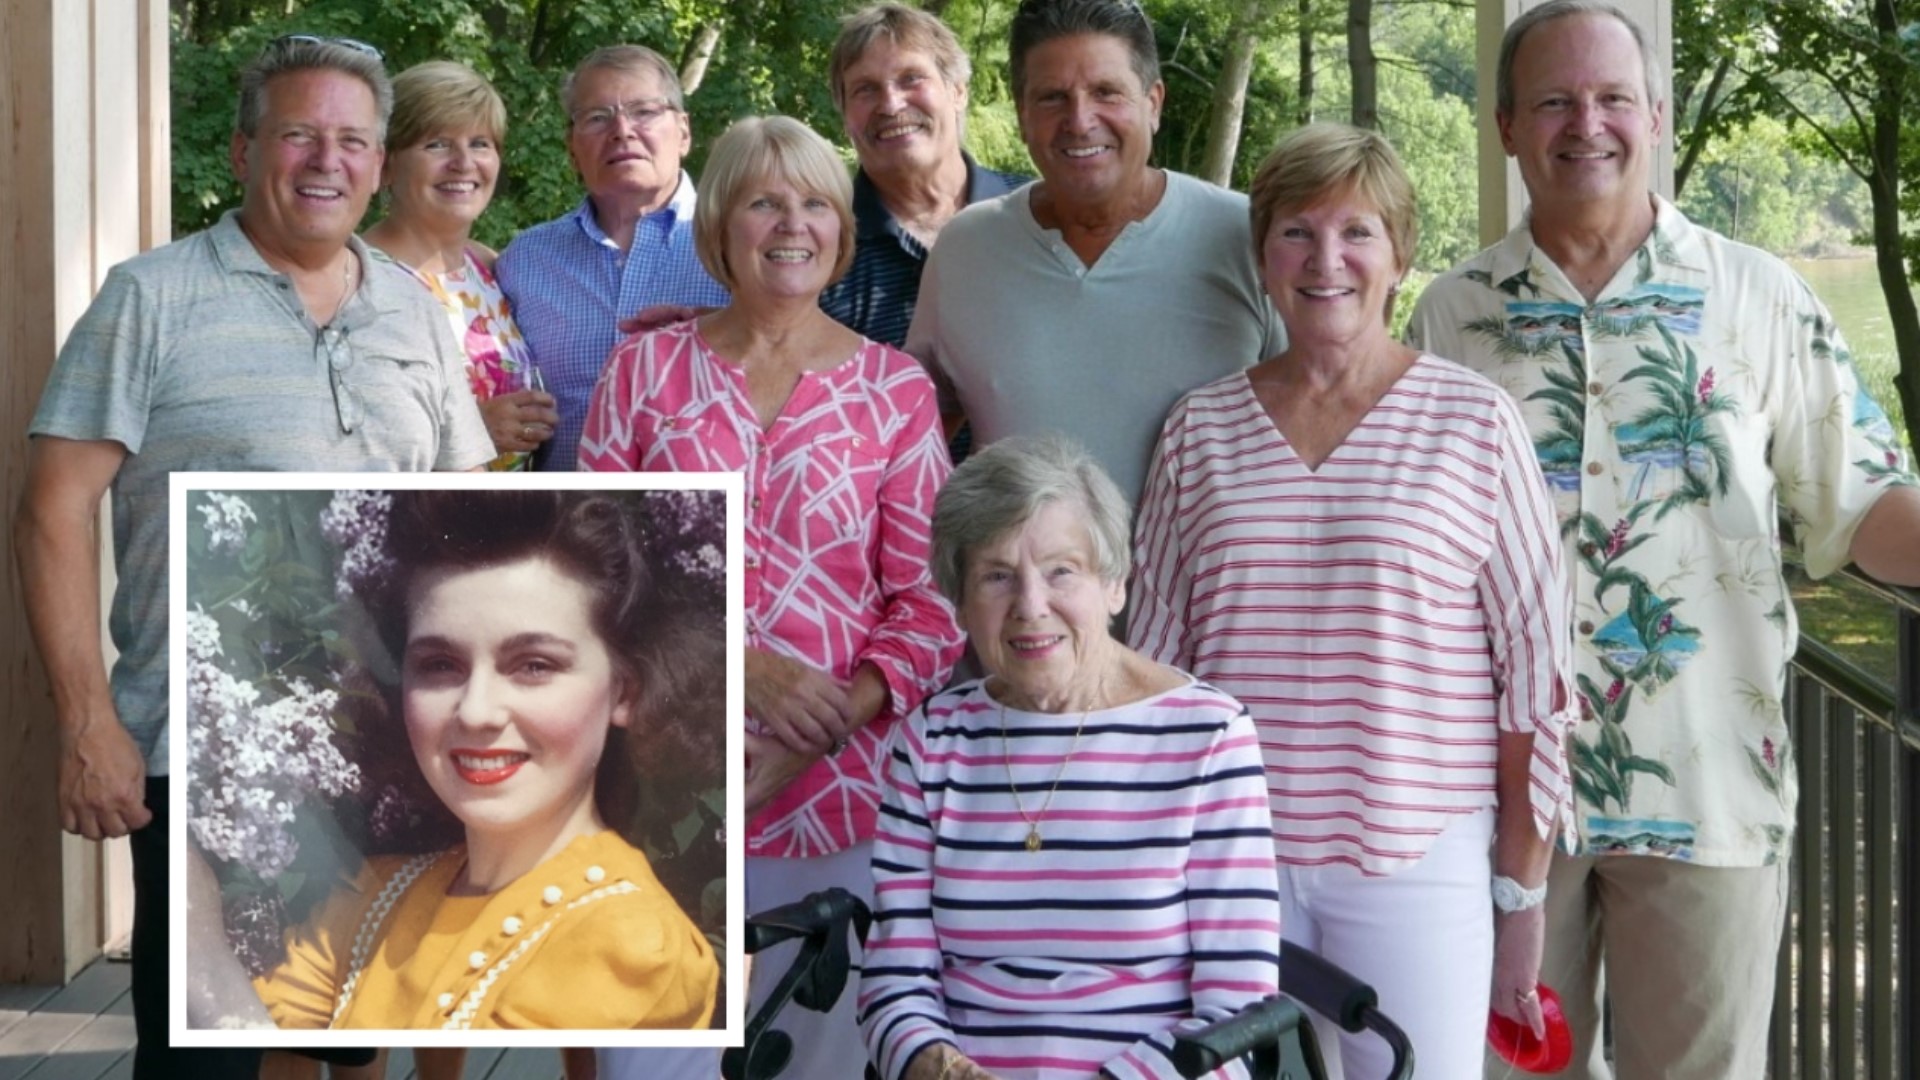 About to turn 102 years old, Mary Jane Hastings has 29 grandchildren and soon-to-be 32 great-great-grandchildren.